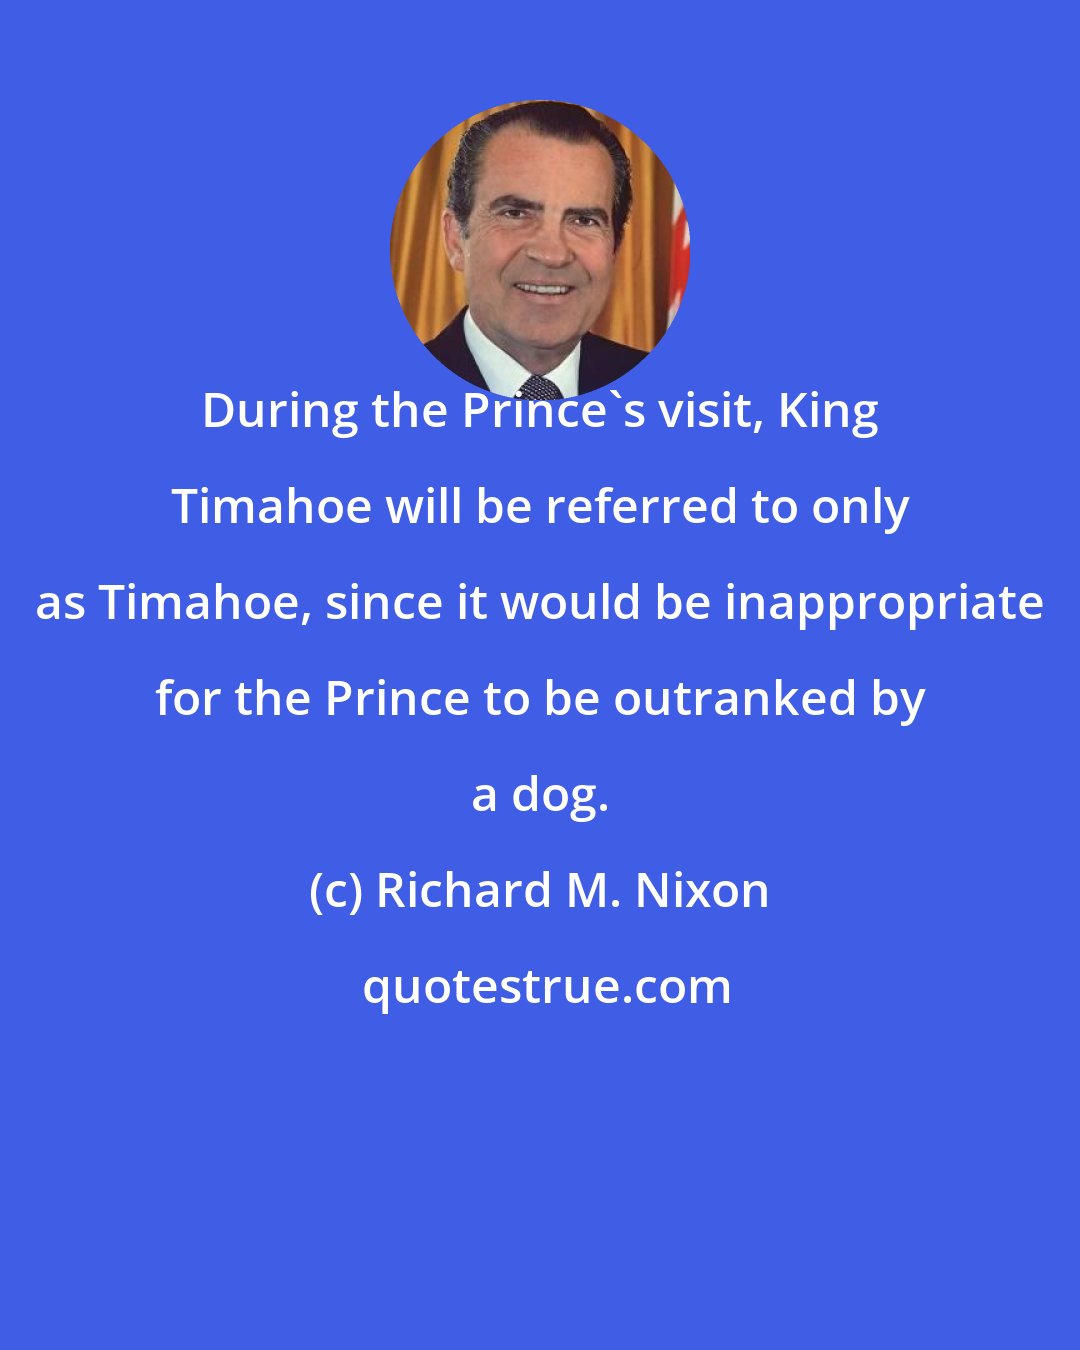 Richard M. Nixon: During the Prince's visit, King Timahoe will be referred to only as Timahoe, since it would be inappropriate for the Prince to be outranked by a dog.